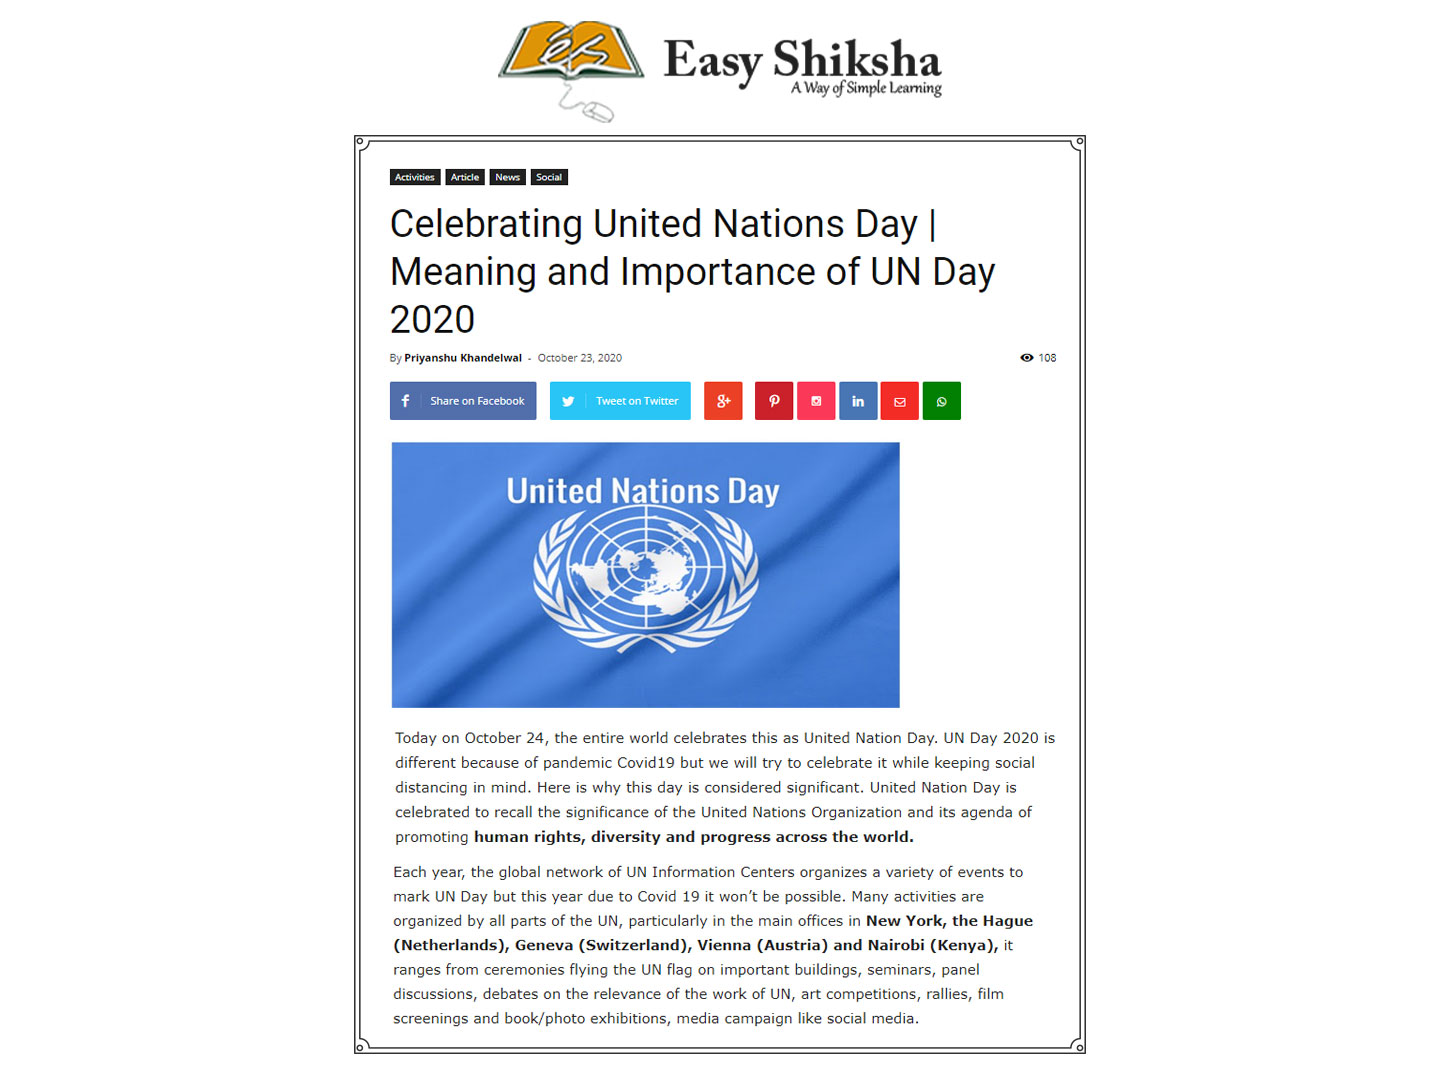 Celebrating United Nations Day Meaning and Importance of UN Day 2020